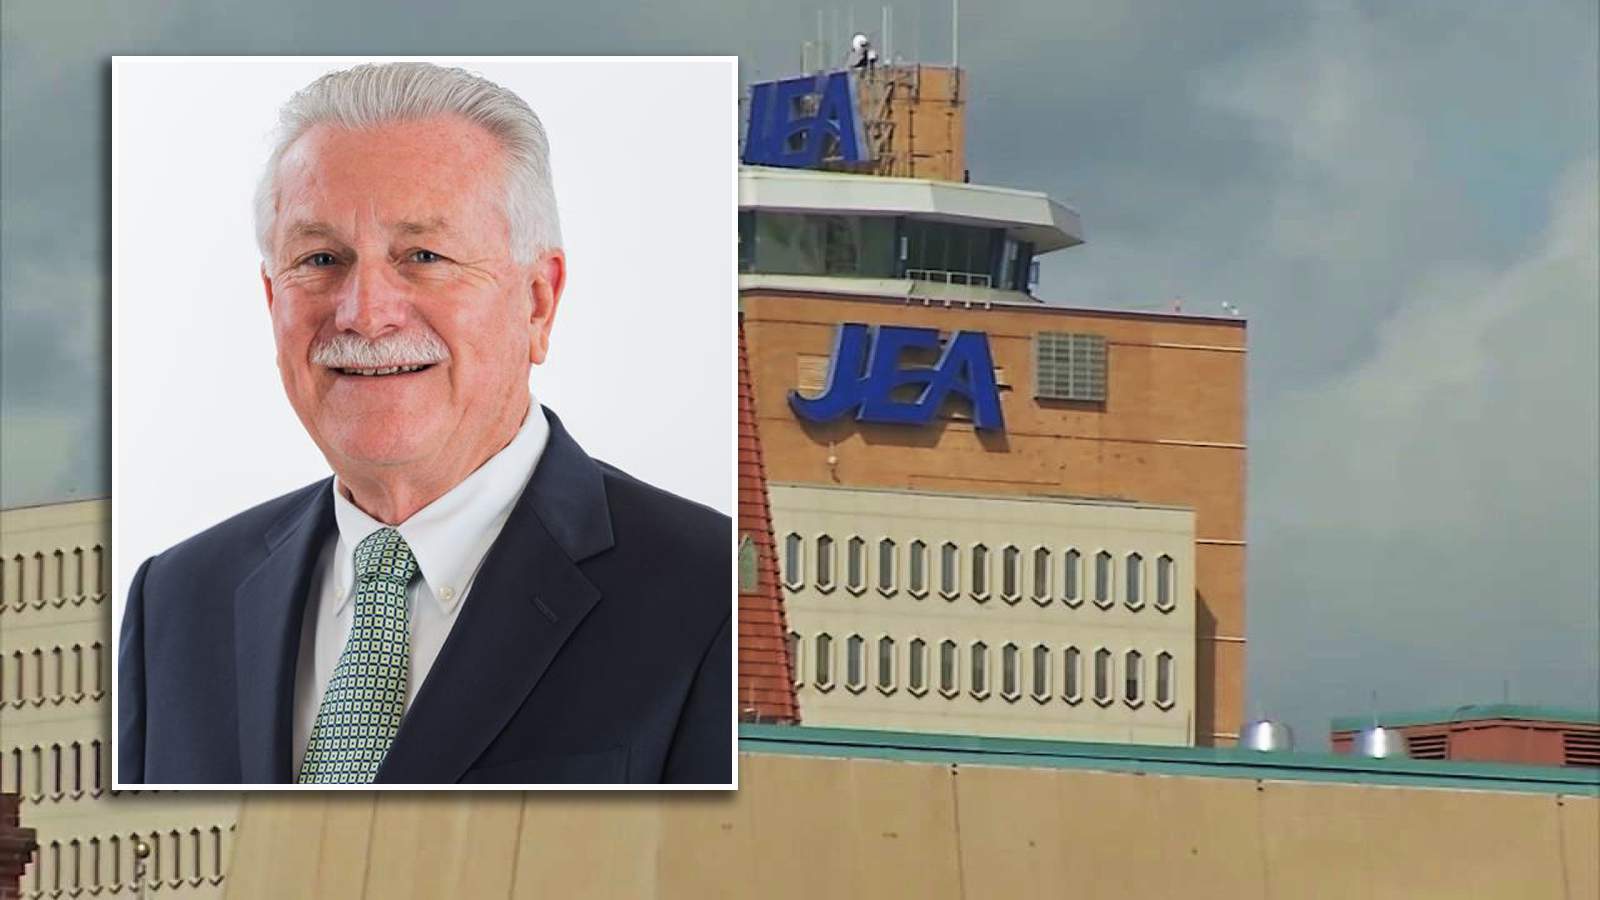 JEA’s chief compliance officer is retiring after 46 years